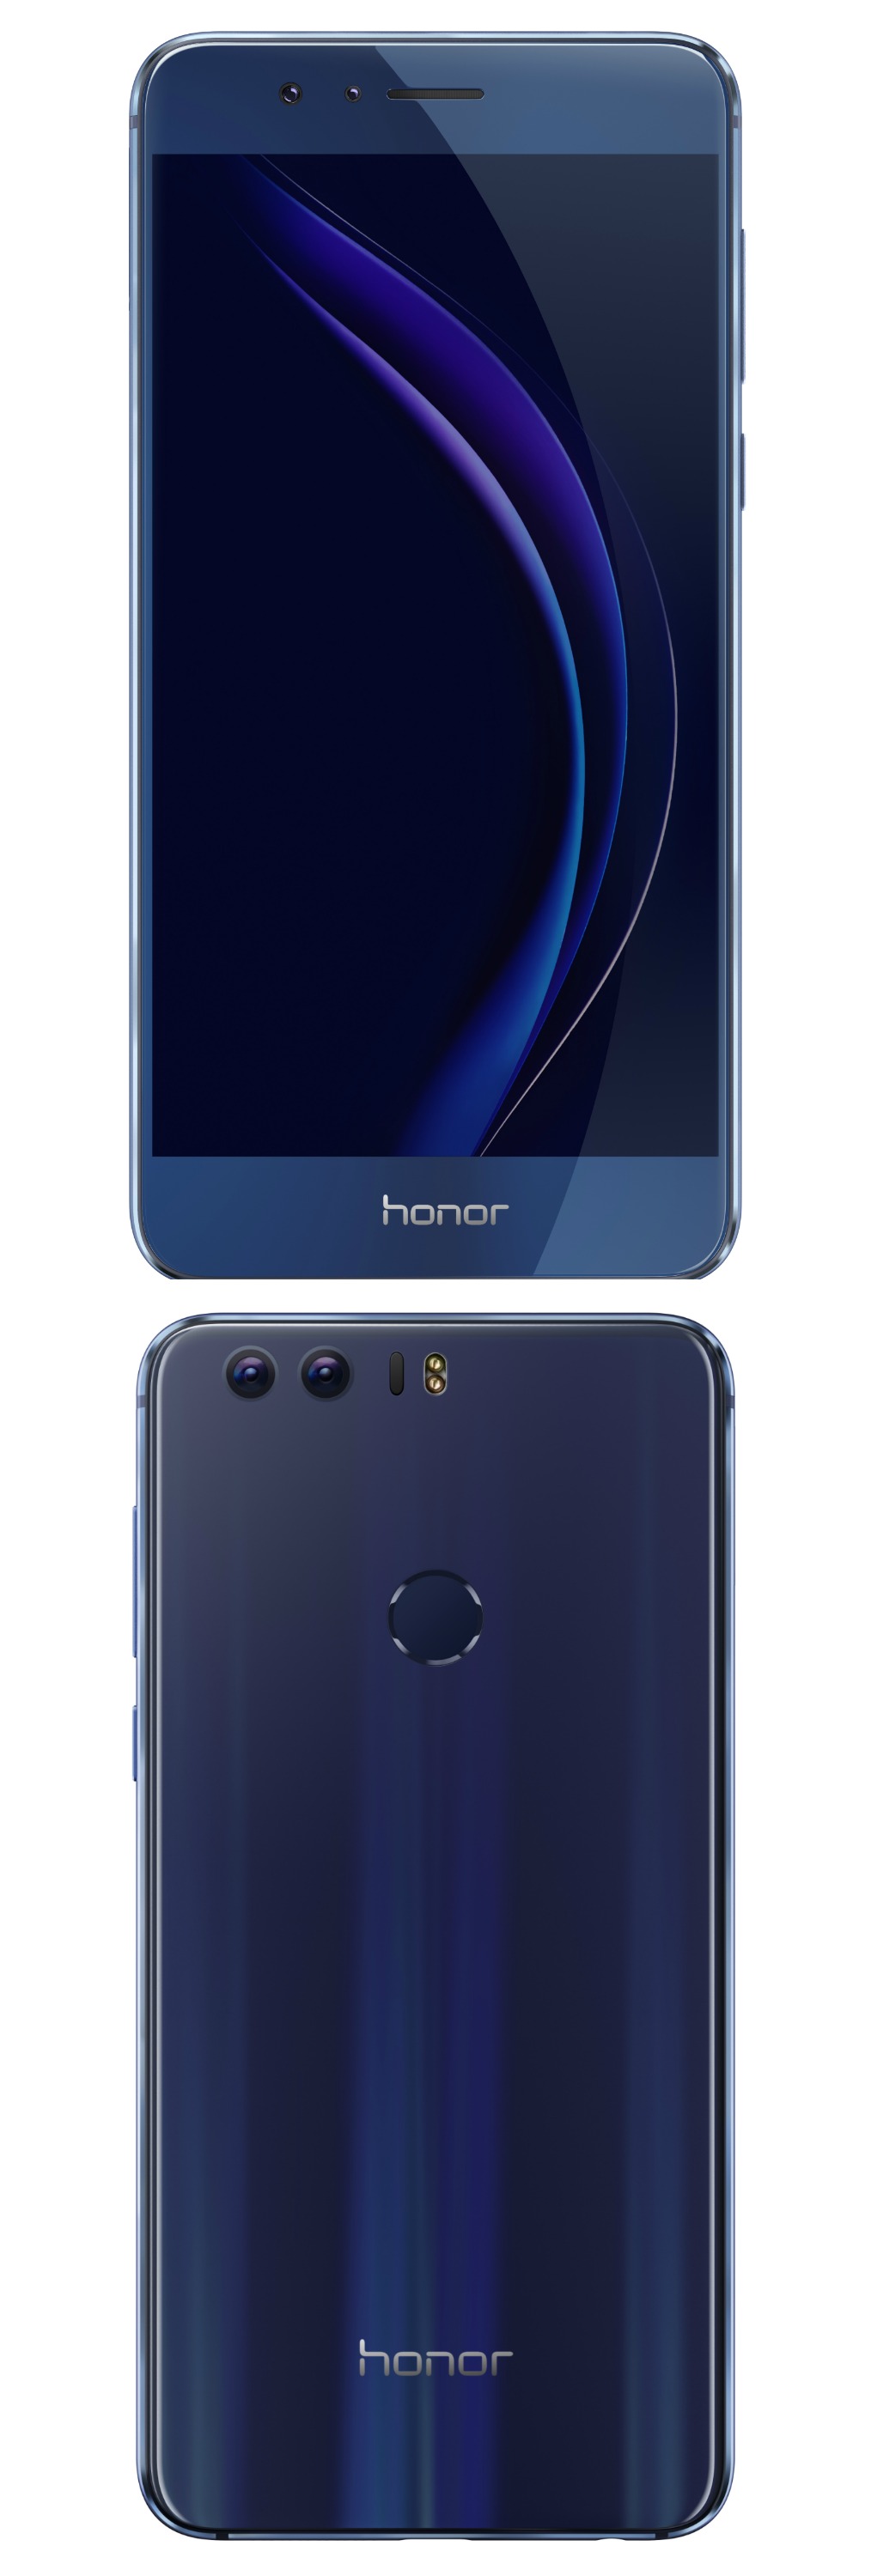 The new Huawei (wah-way) Honor 8 unlocked smartphone available in an exclusive Sapphire Blue colorway Only at Best Buy #ad